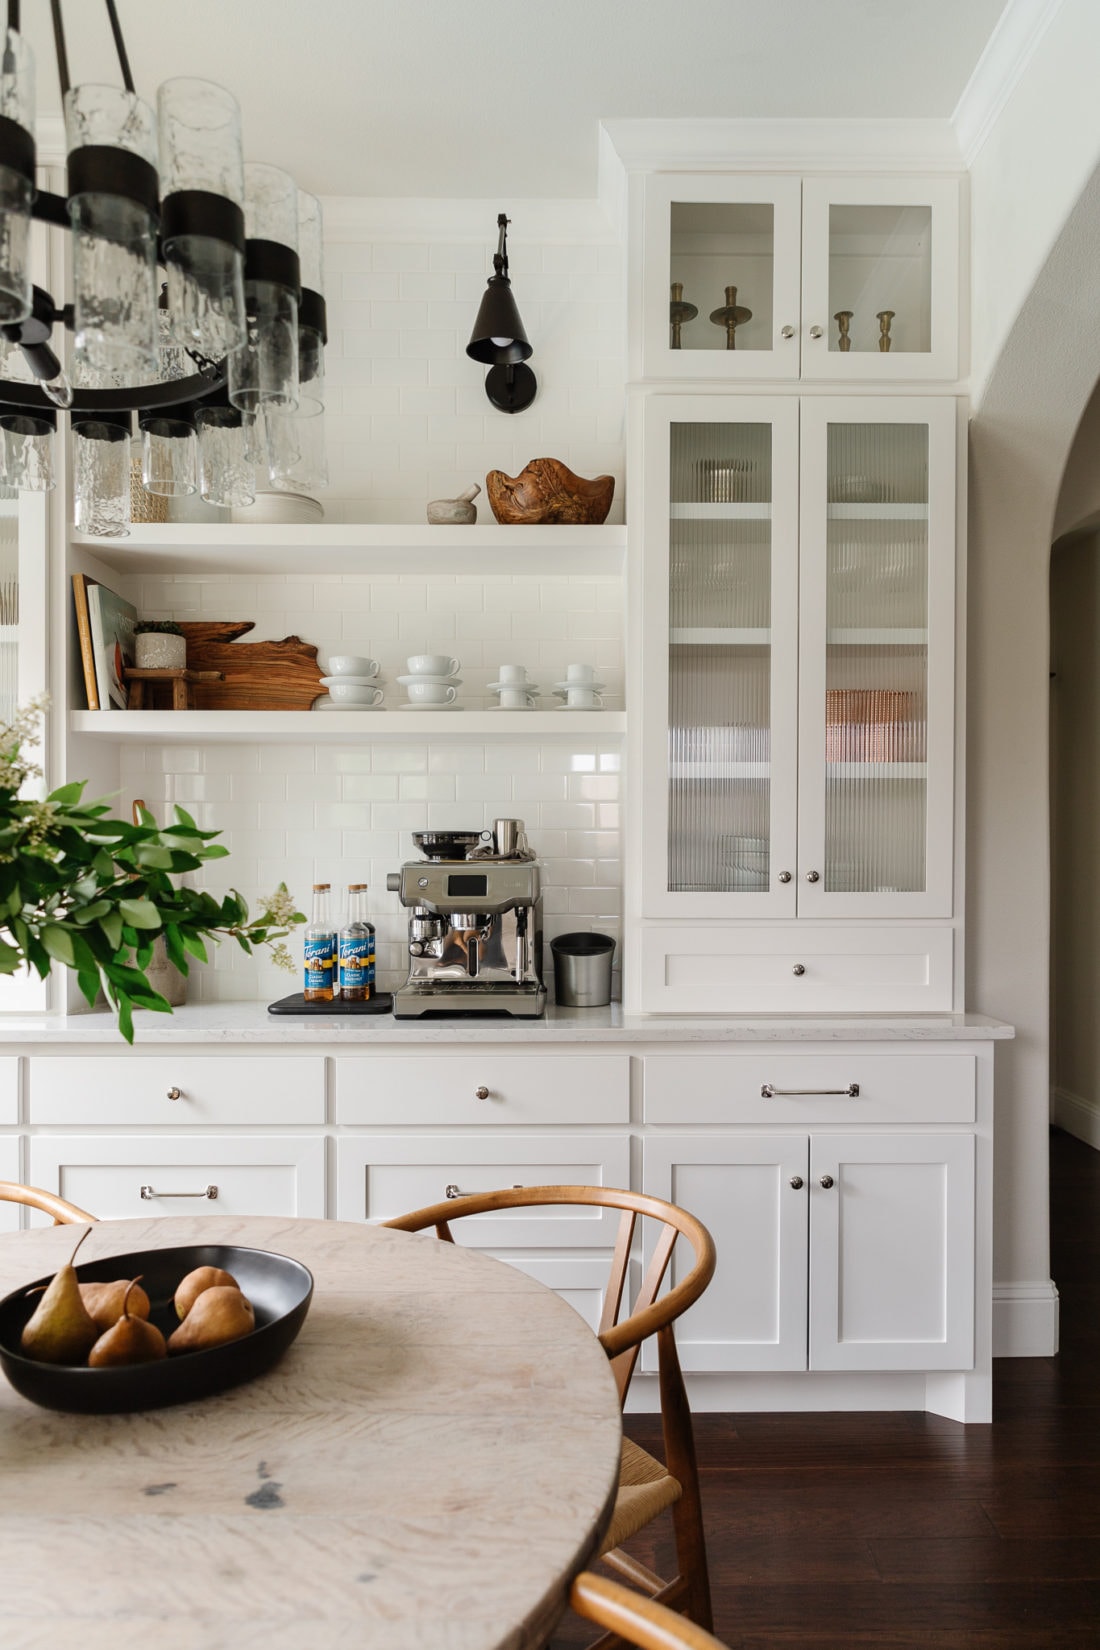 510 Coffee Station in the Kitchen ideas